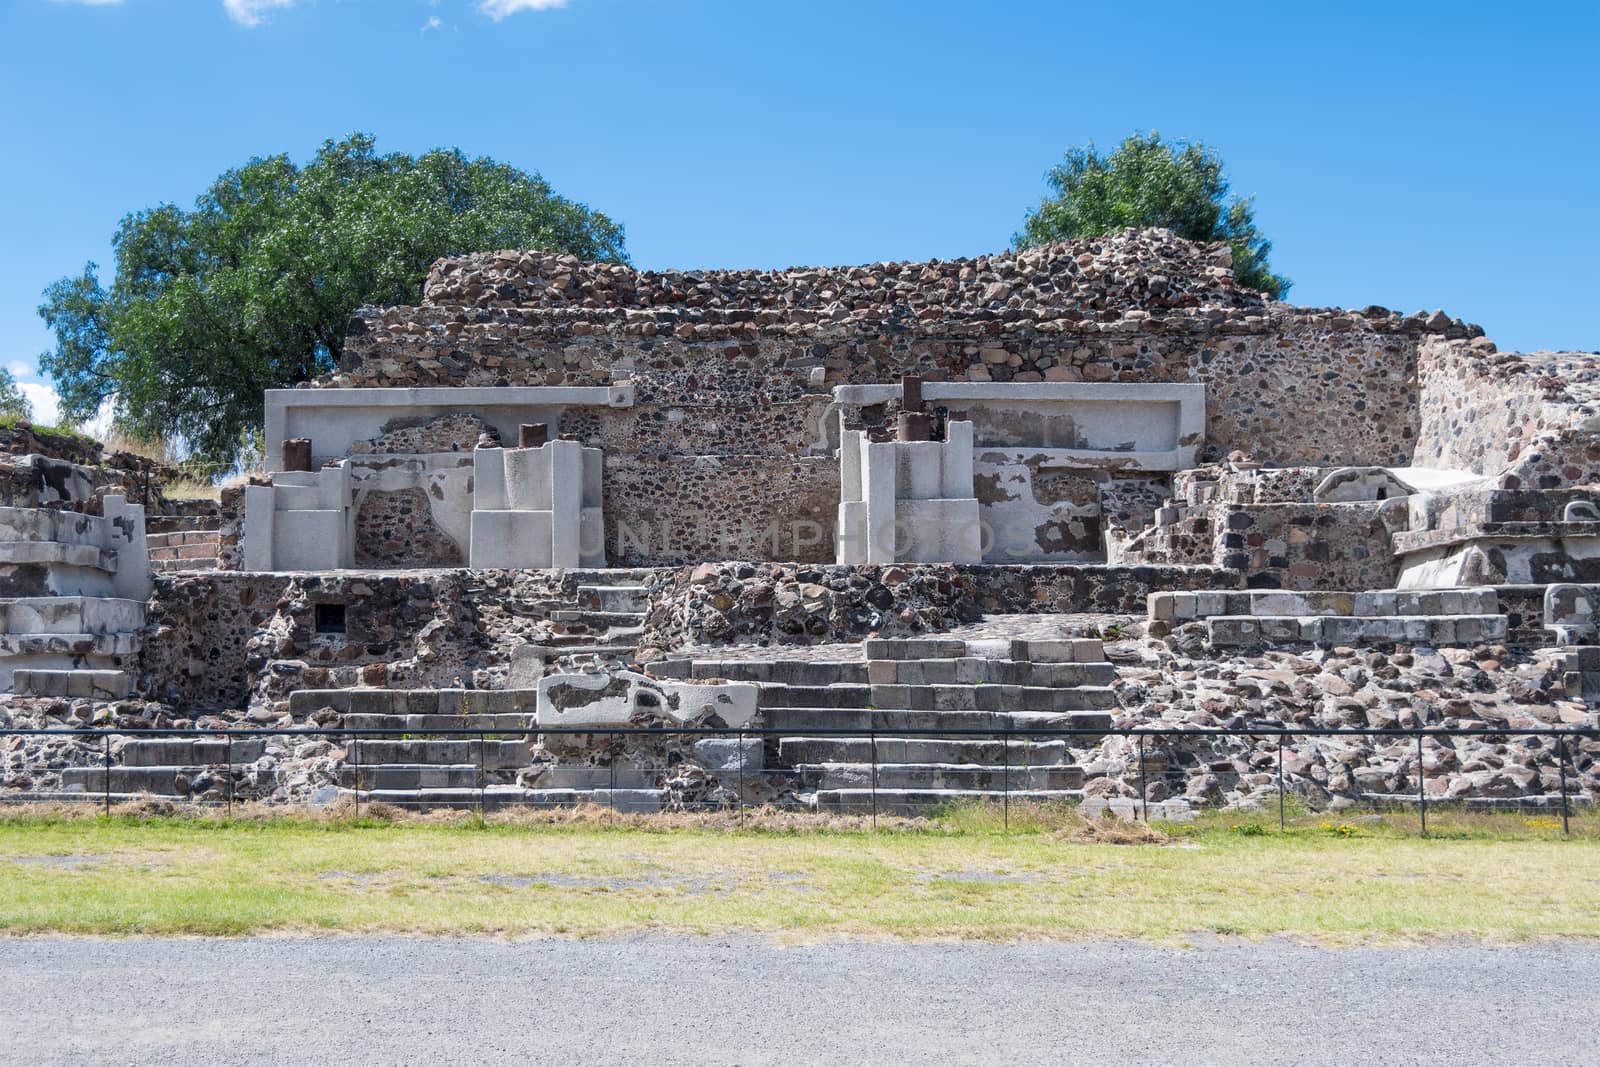 The Palace of the Jaguars is located west of the Plaza of the Moon, in San Juan Teotihuacan, Mexico. It's also called the Temple of the Jaguars.